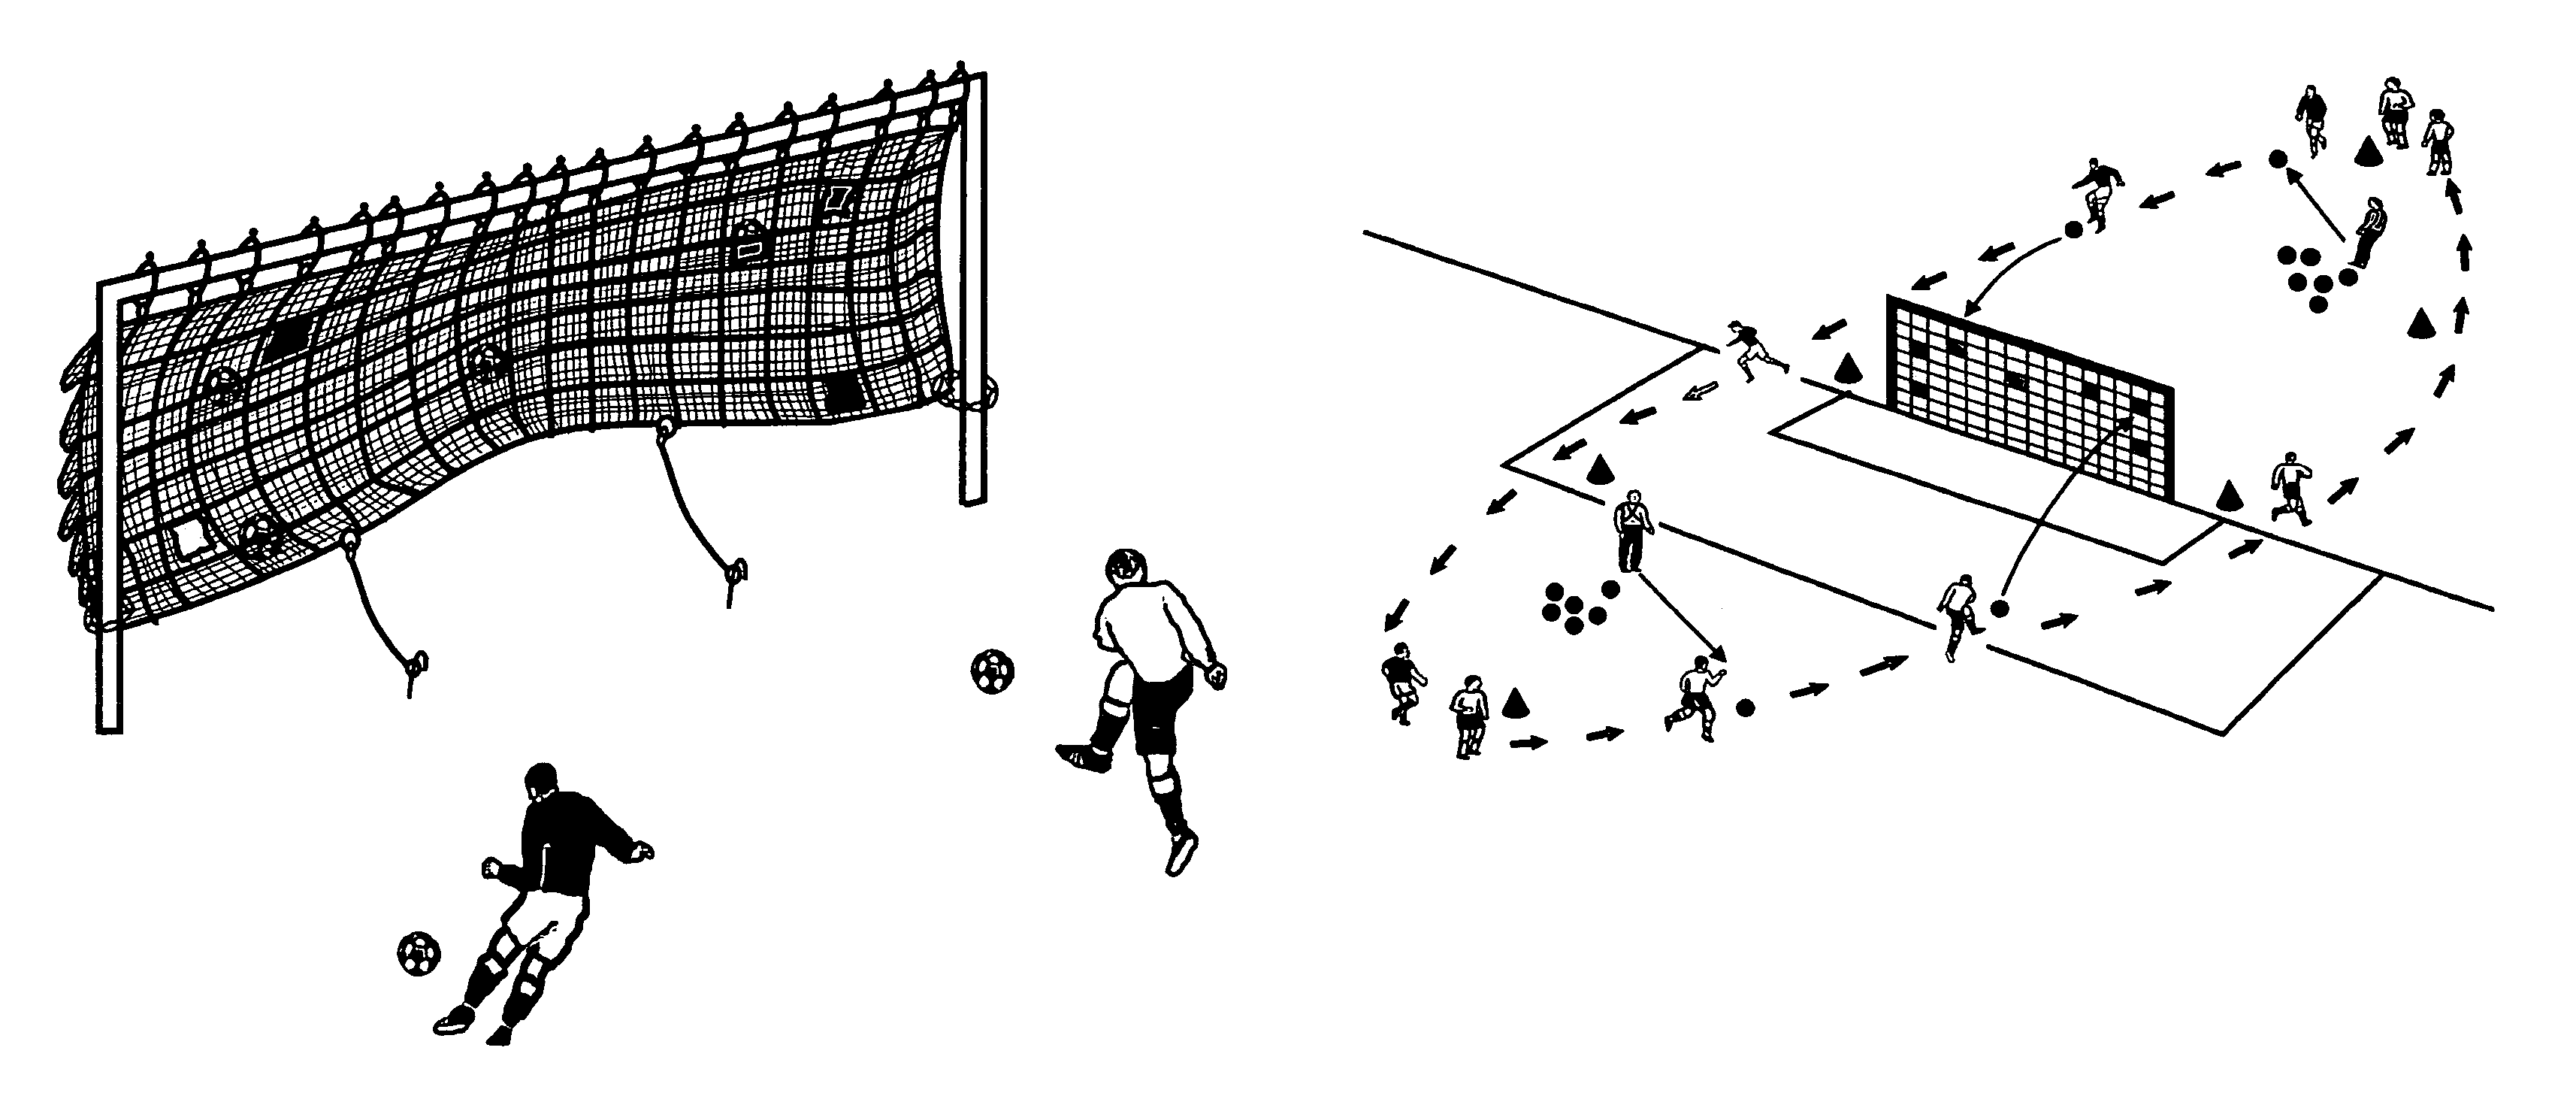 Ball catching system for training soccer players